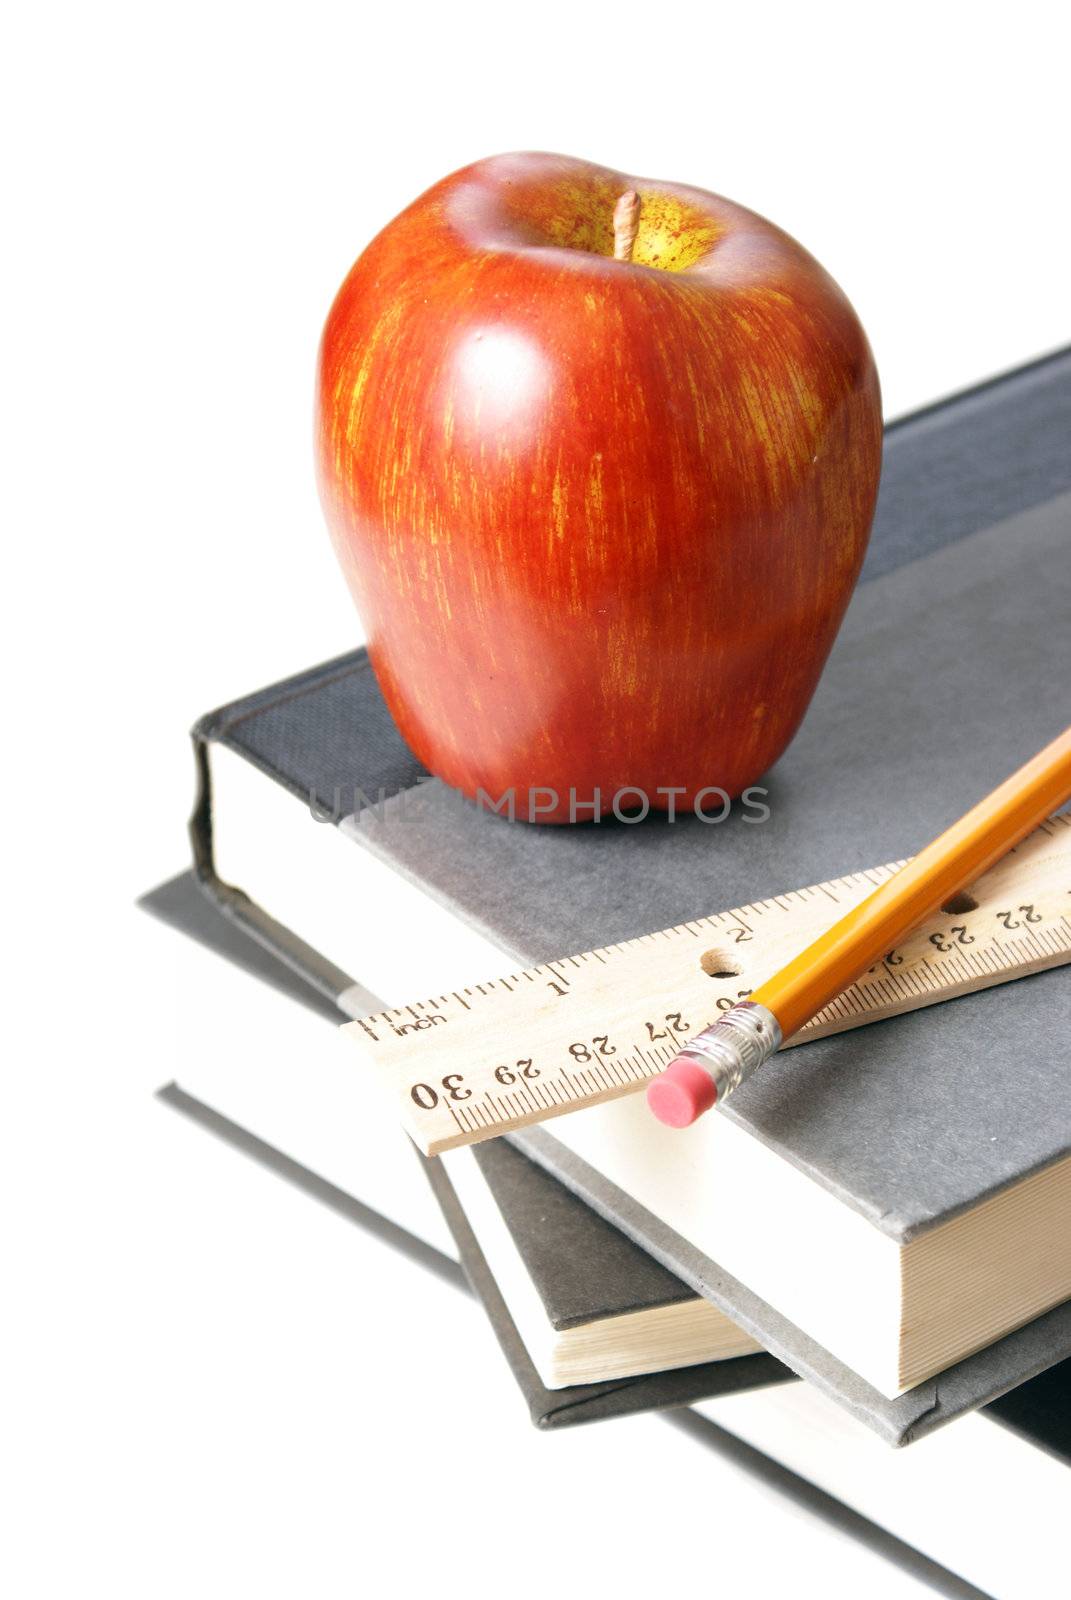 A few school books with an apple, ruler, and pencil.